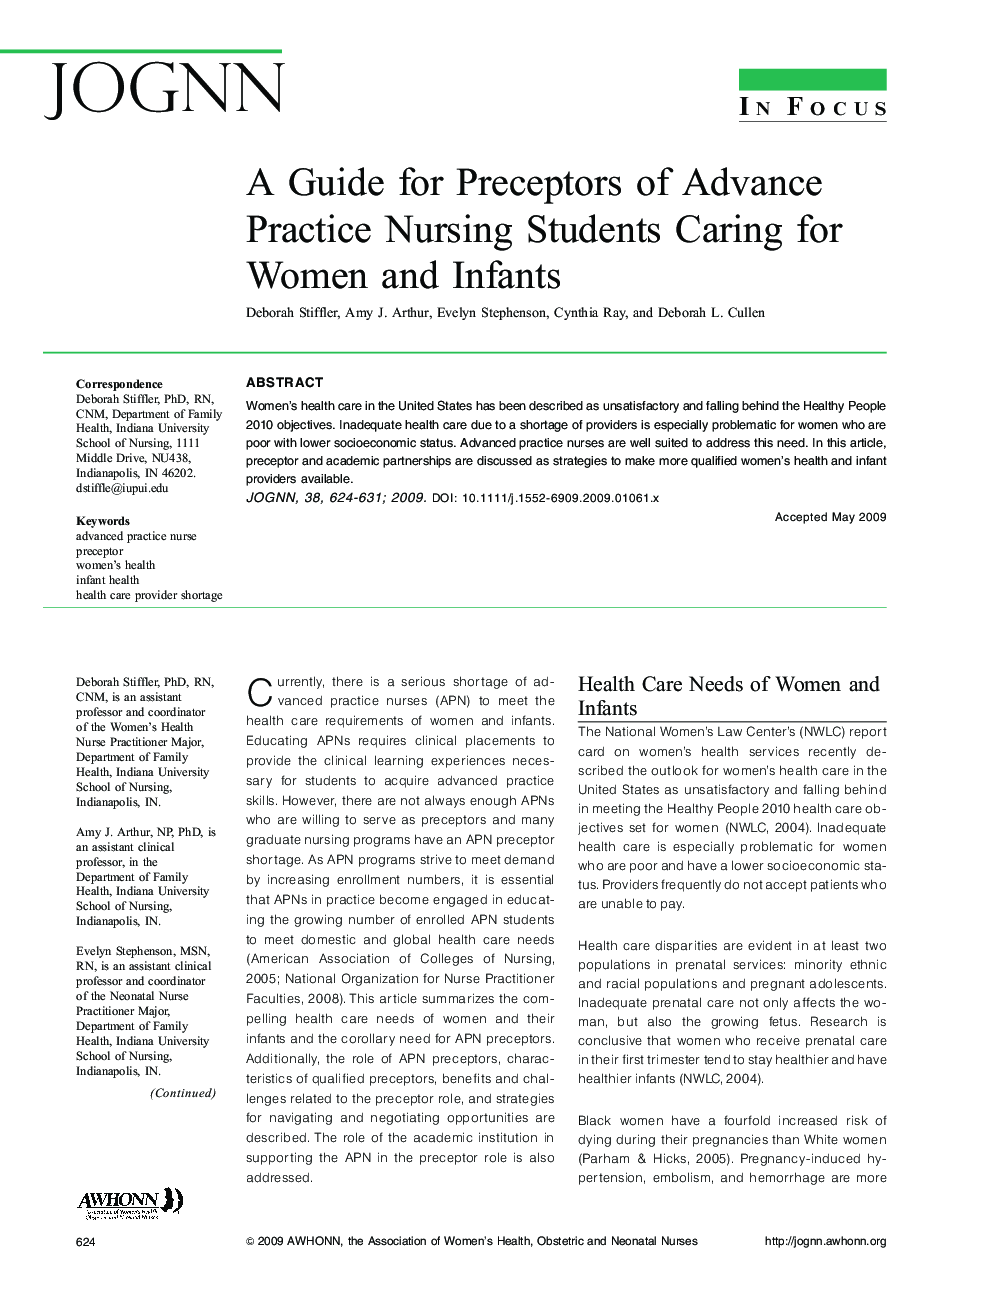 A Guide for Preceptors of Advance Practice Nursing Students Caring for Women and Infants